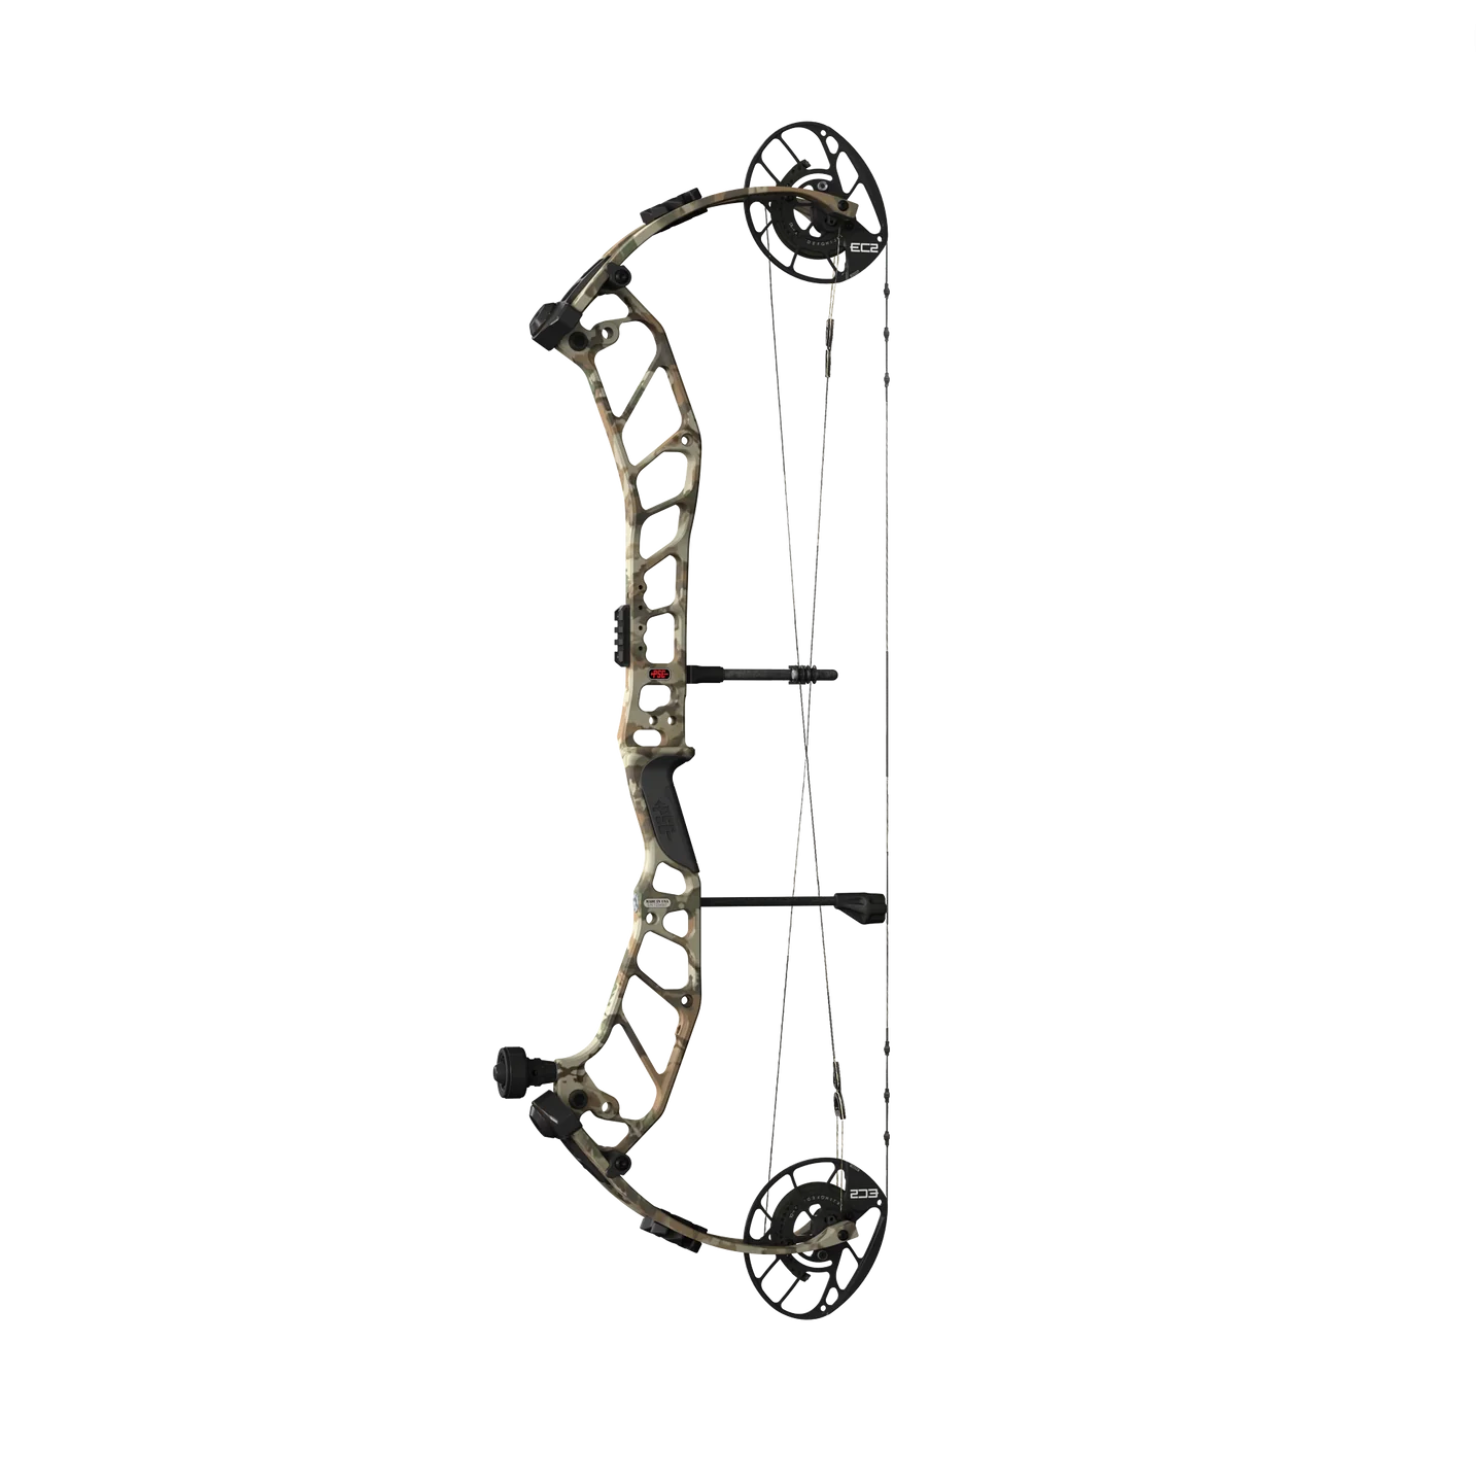 PSE Fortis 33 Compound Bow